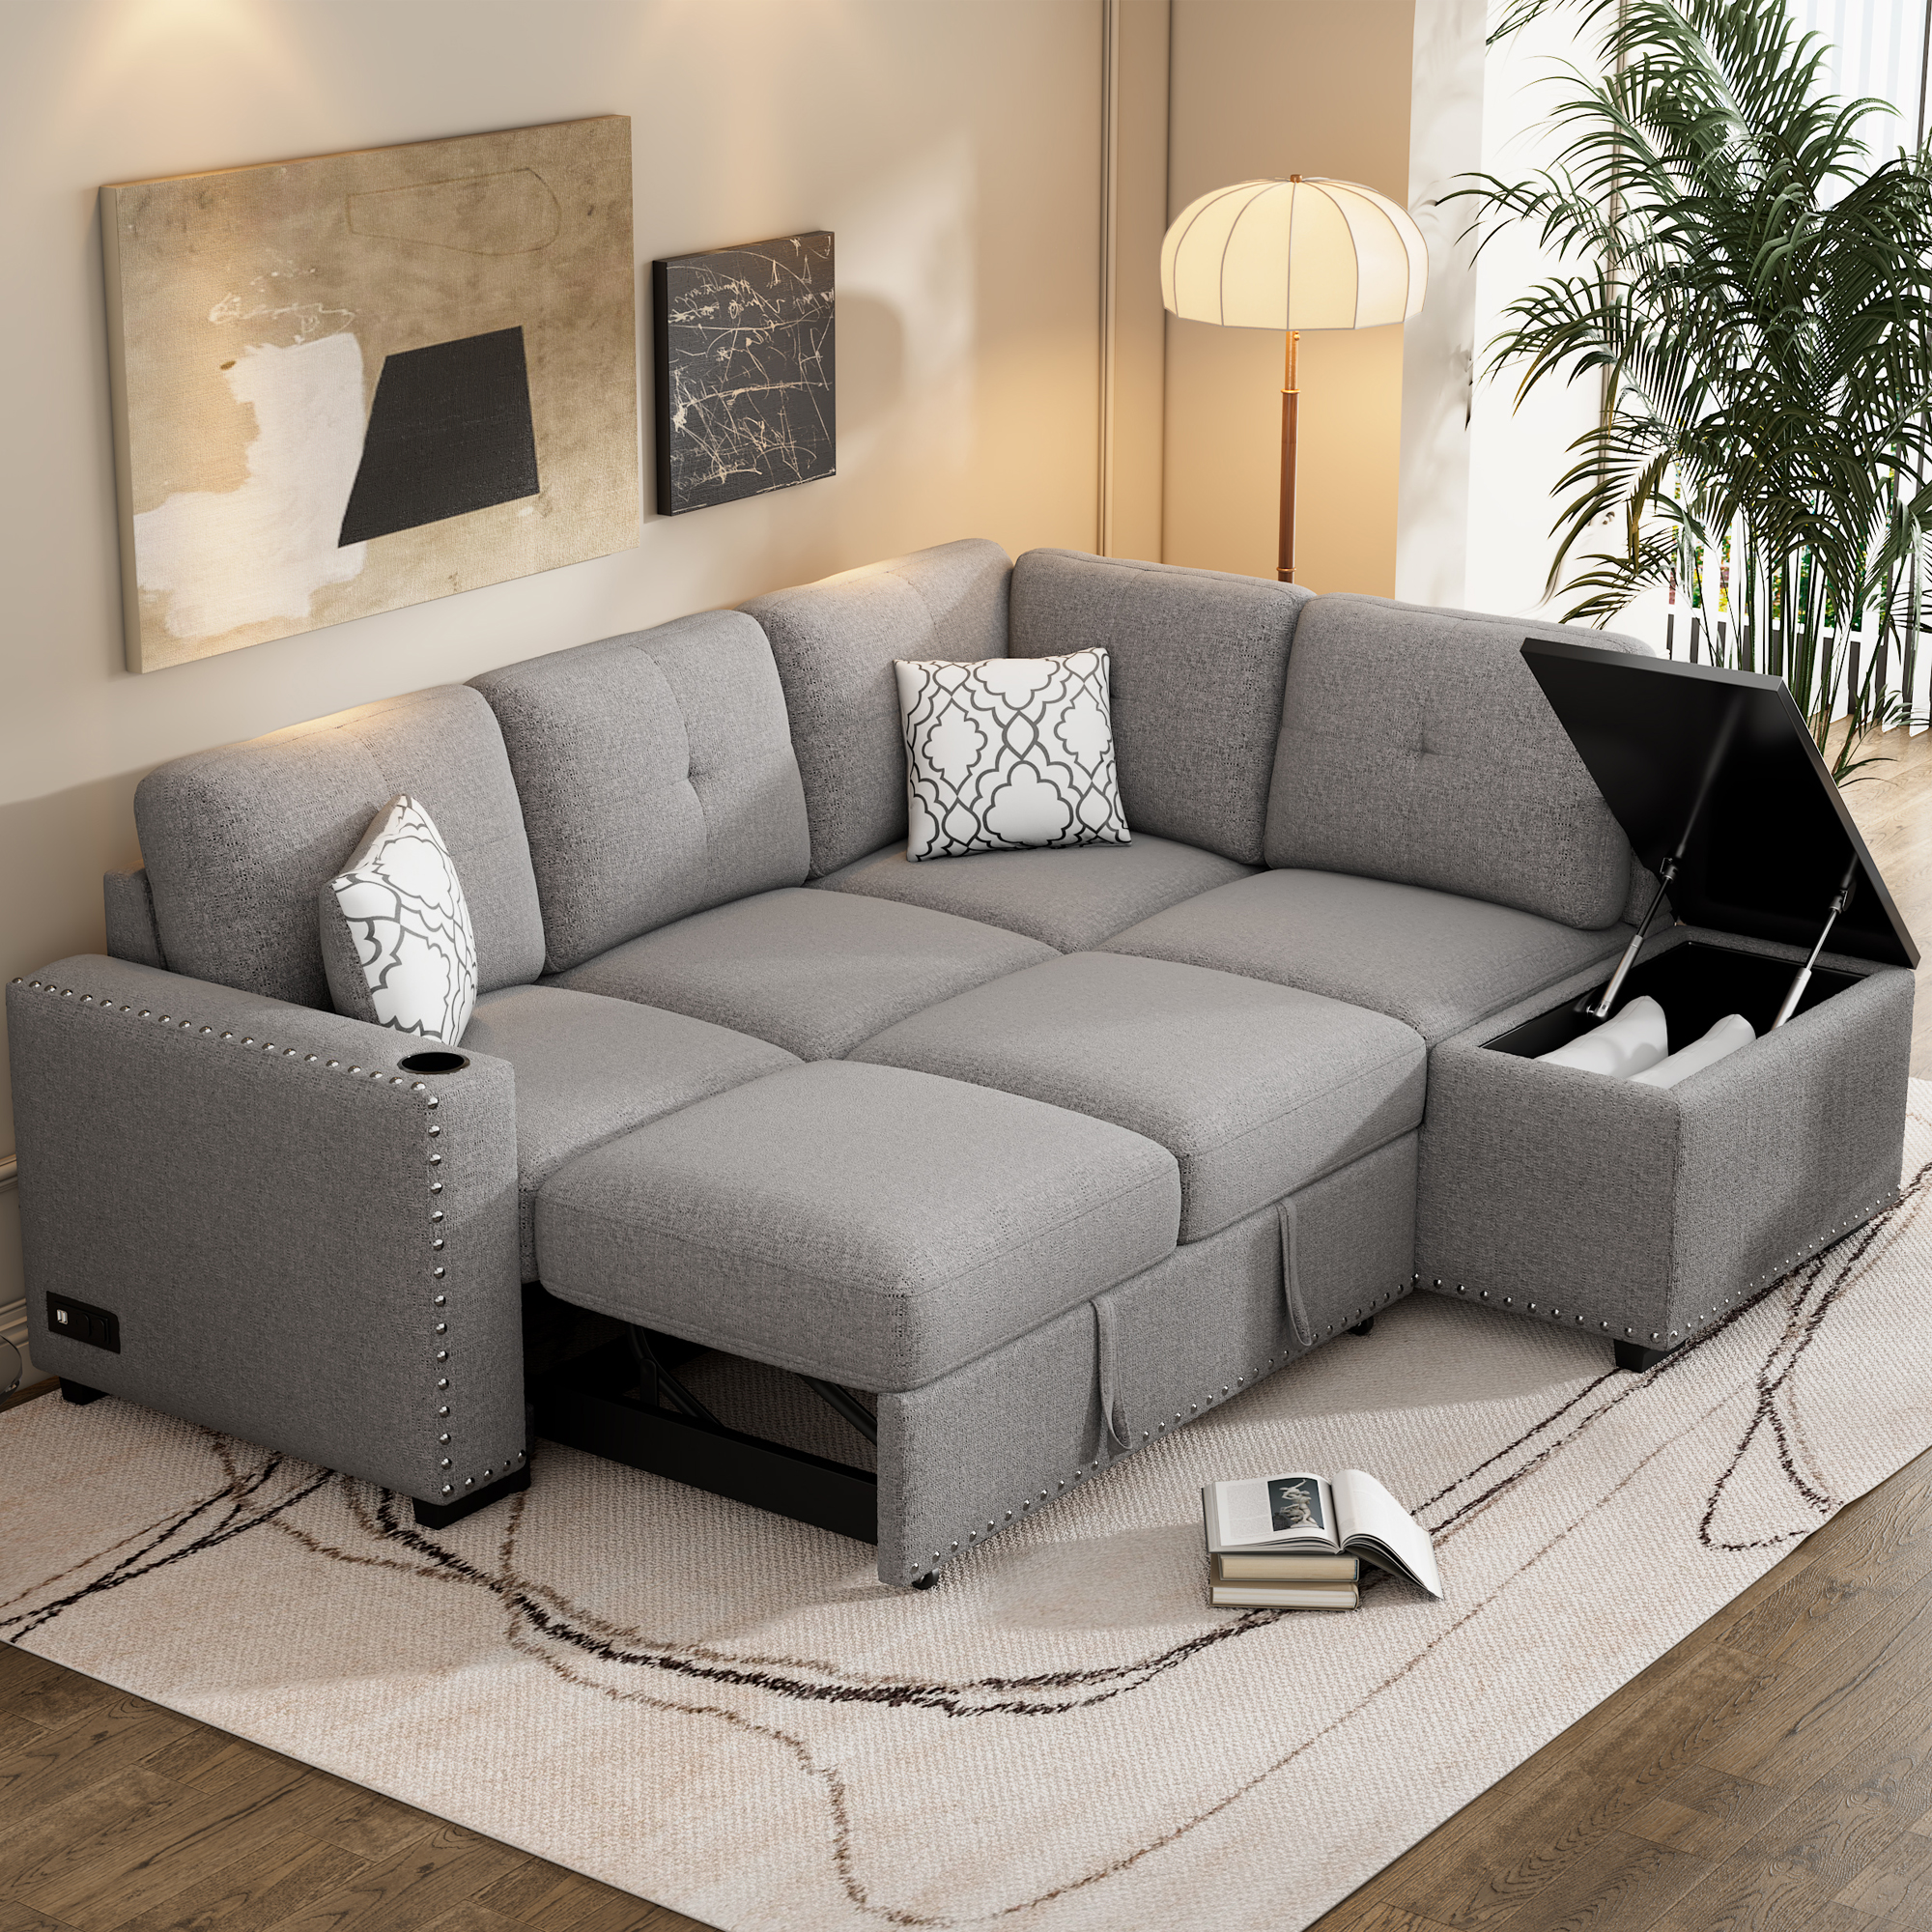 83.8" Reversible Sectional Pull-out Sofa Bed - SG001080AAE